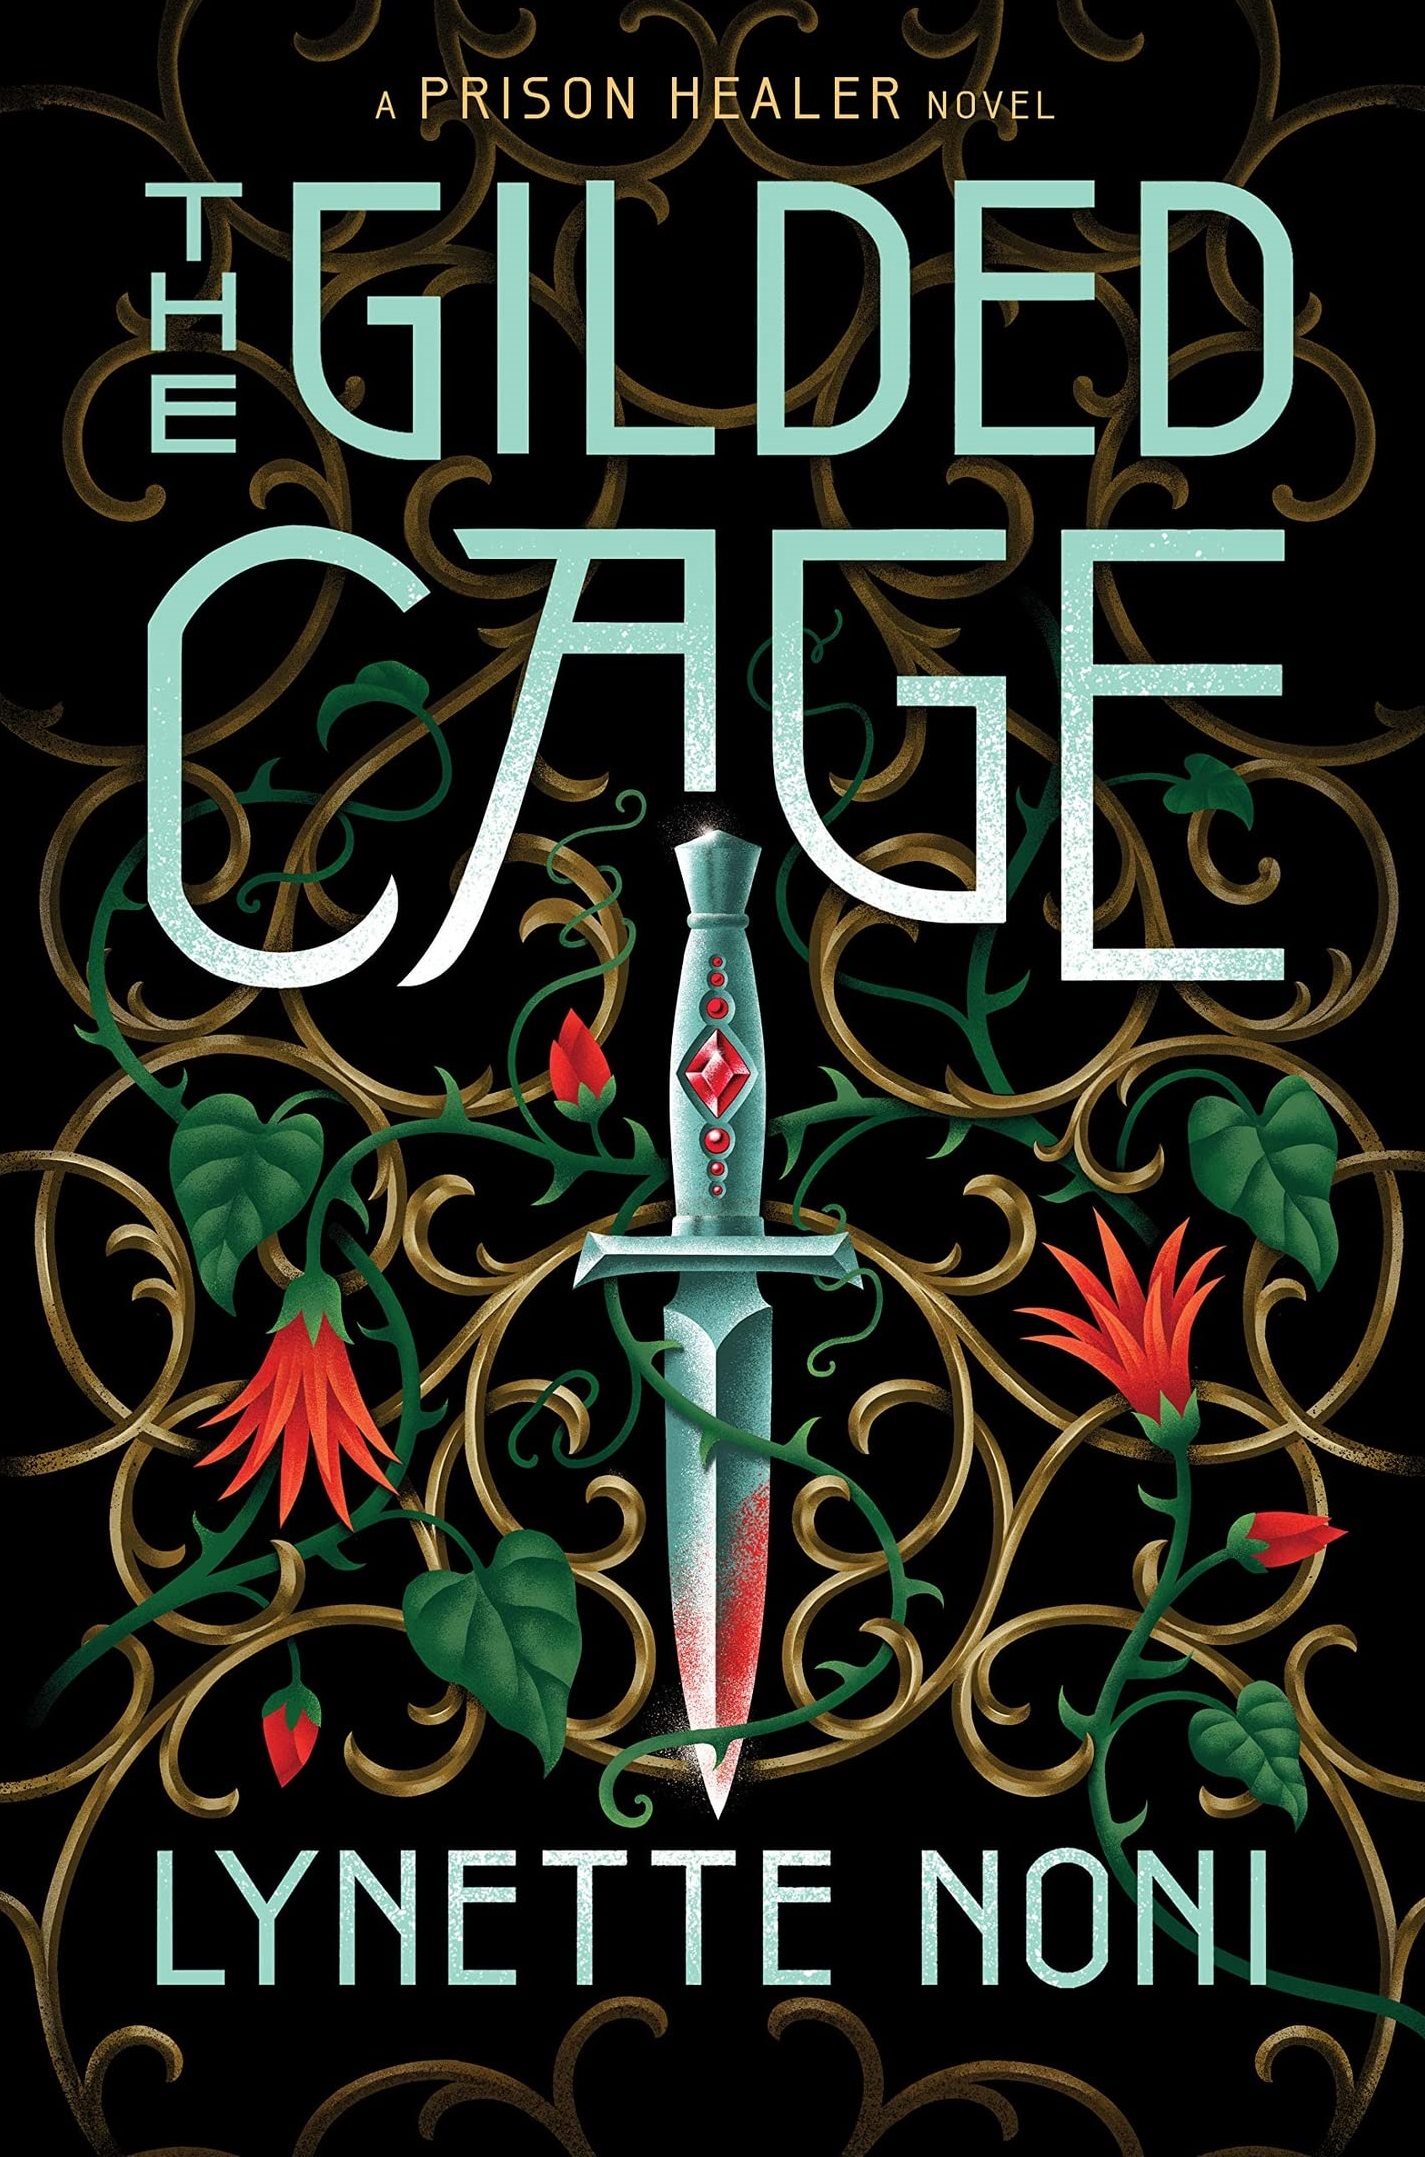 cover for lynette Noni's The Gilded Cage. It features a black background with a motif of vines and red flowers surrounding a silver dagger in the middle. The book's title is in the top third while the author's name is at the very bottom.